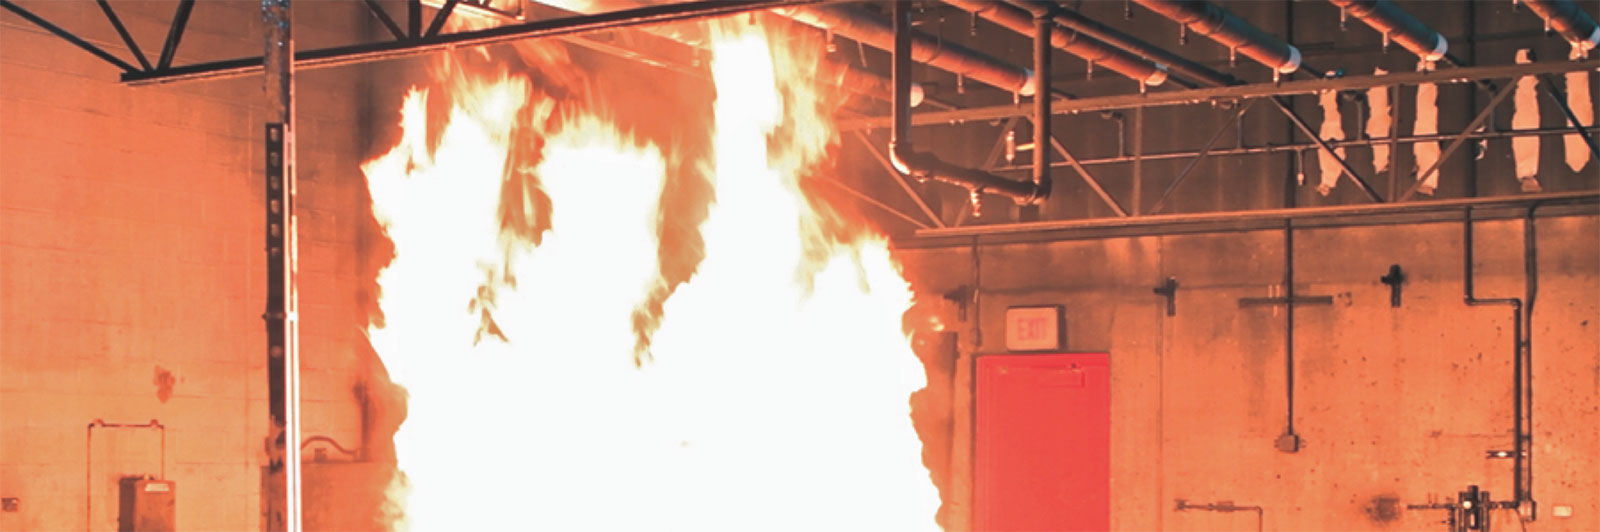 Resistance to Flammability is the Key Component to UL 2901